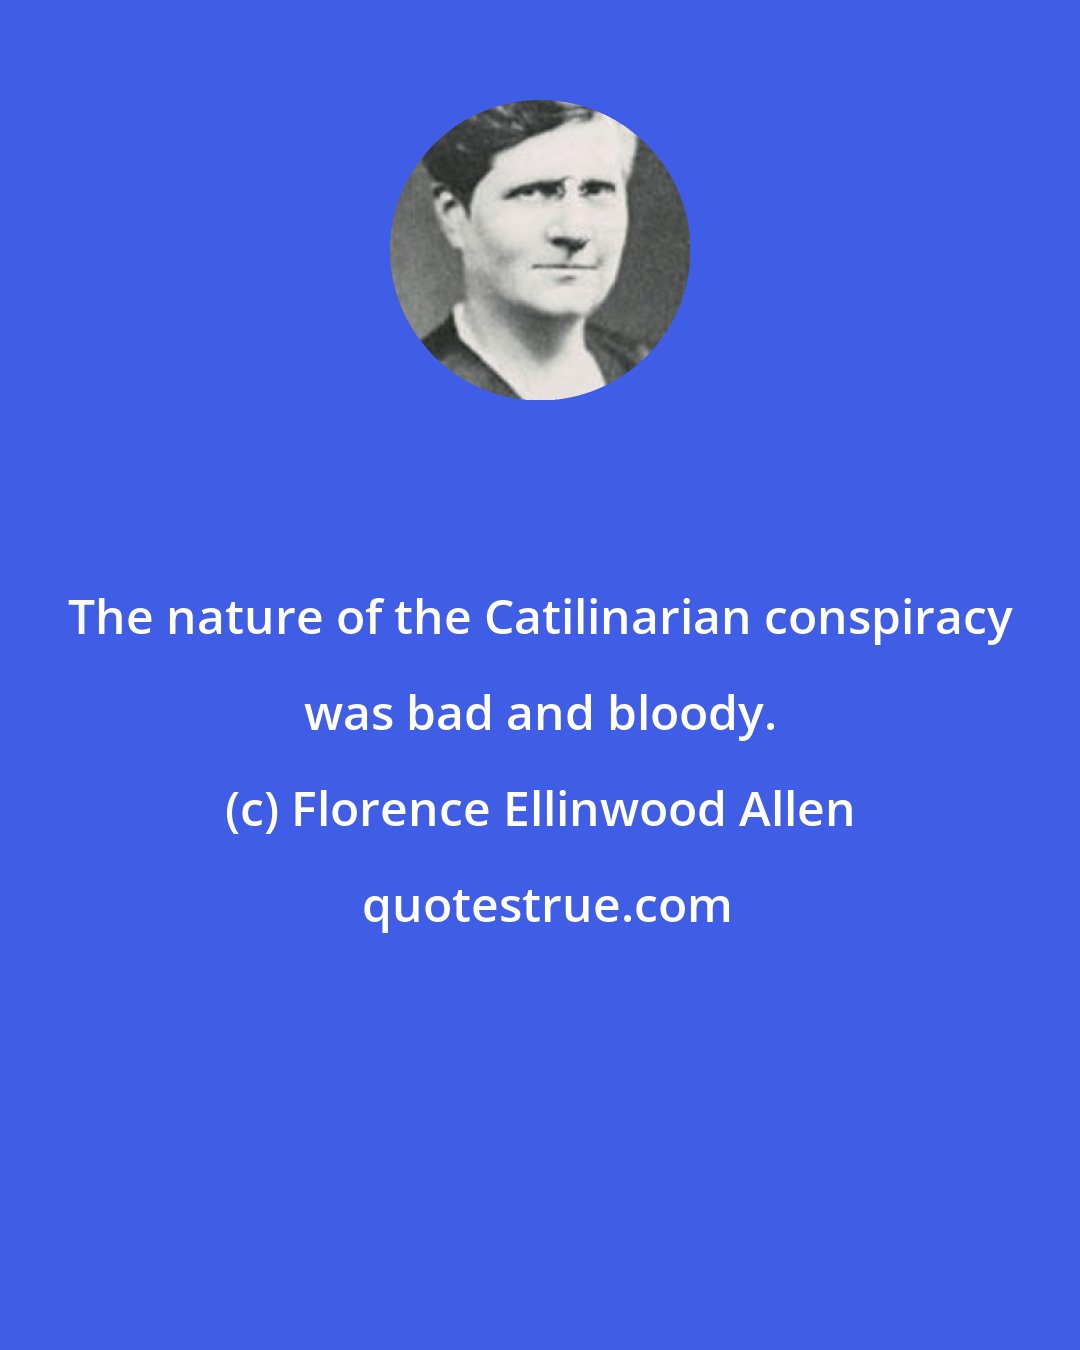 Florence Ellinwood Allen: The nature of the Catilinarian conspiracy was bad and bloody.